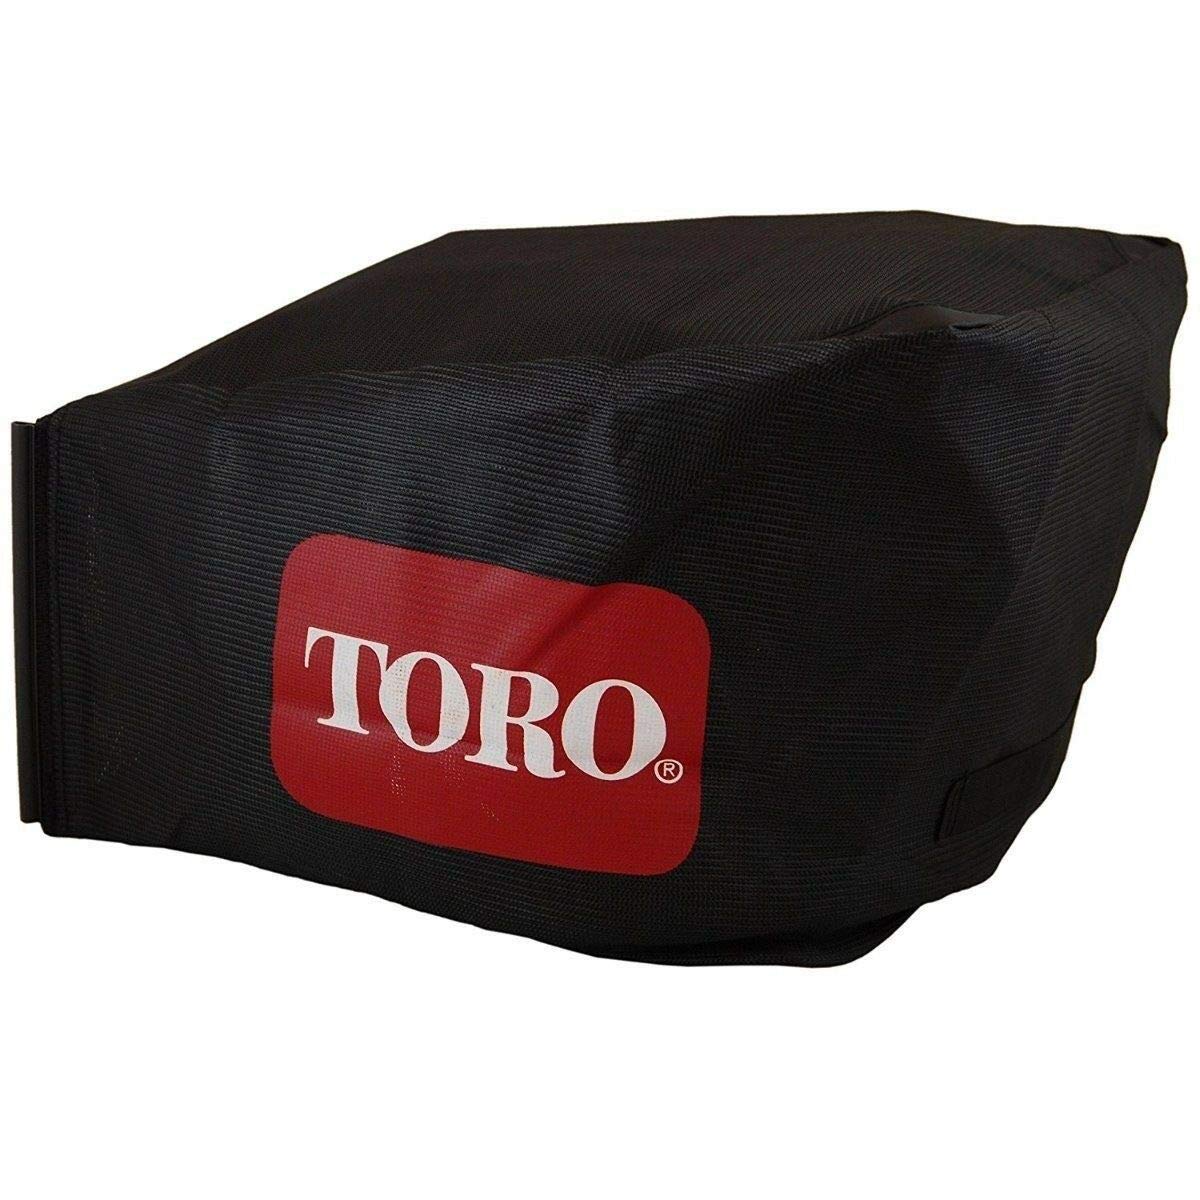 121-5770 New OEM Toro Grass Bag for Toro TIMEMASTER Lawn MOWERS + Free ebook - Your Lawn & Lawn Care -